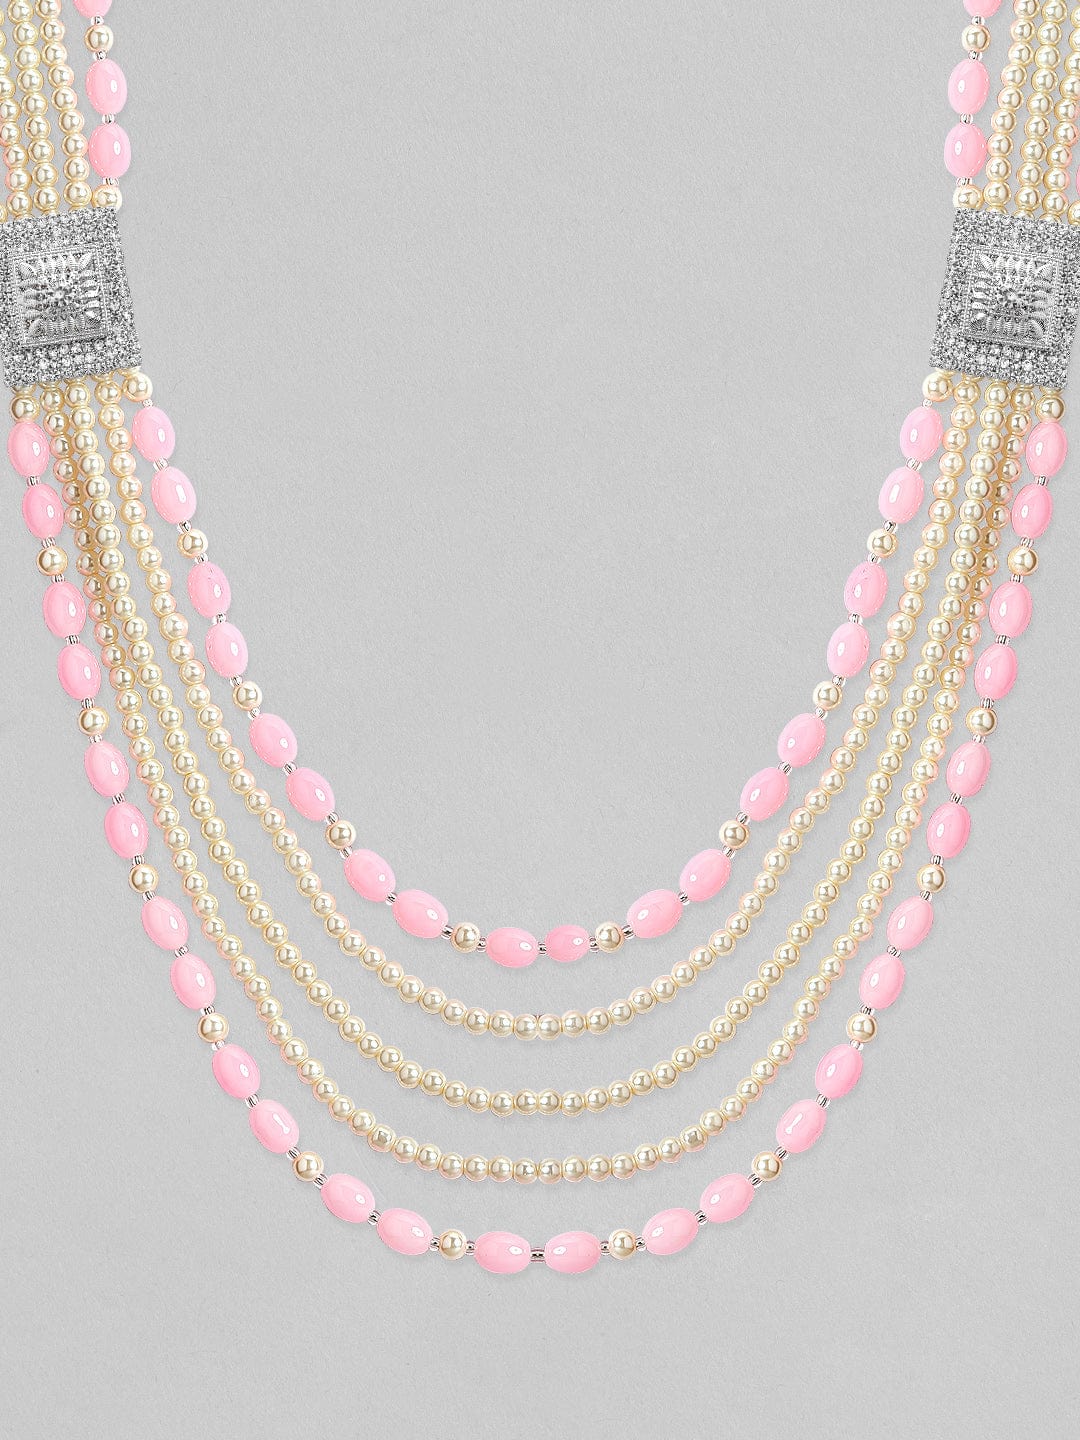 Rubans Pink & Gold Beaded Layered Mens Necklace. Chain & Necklaces